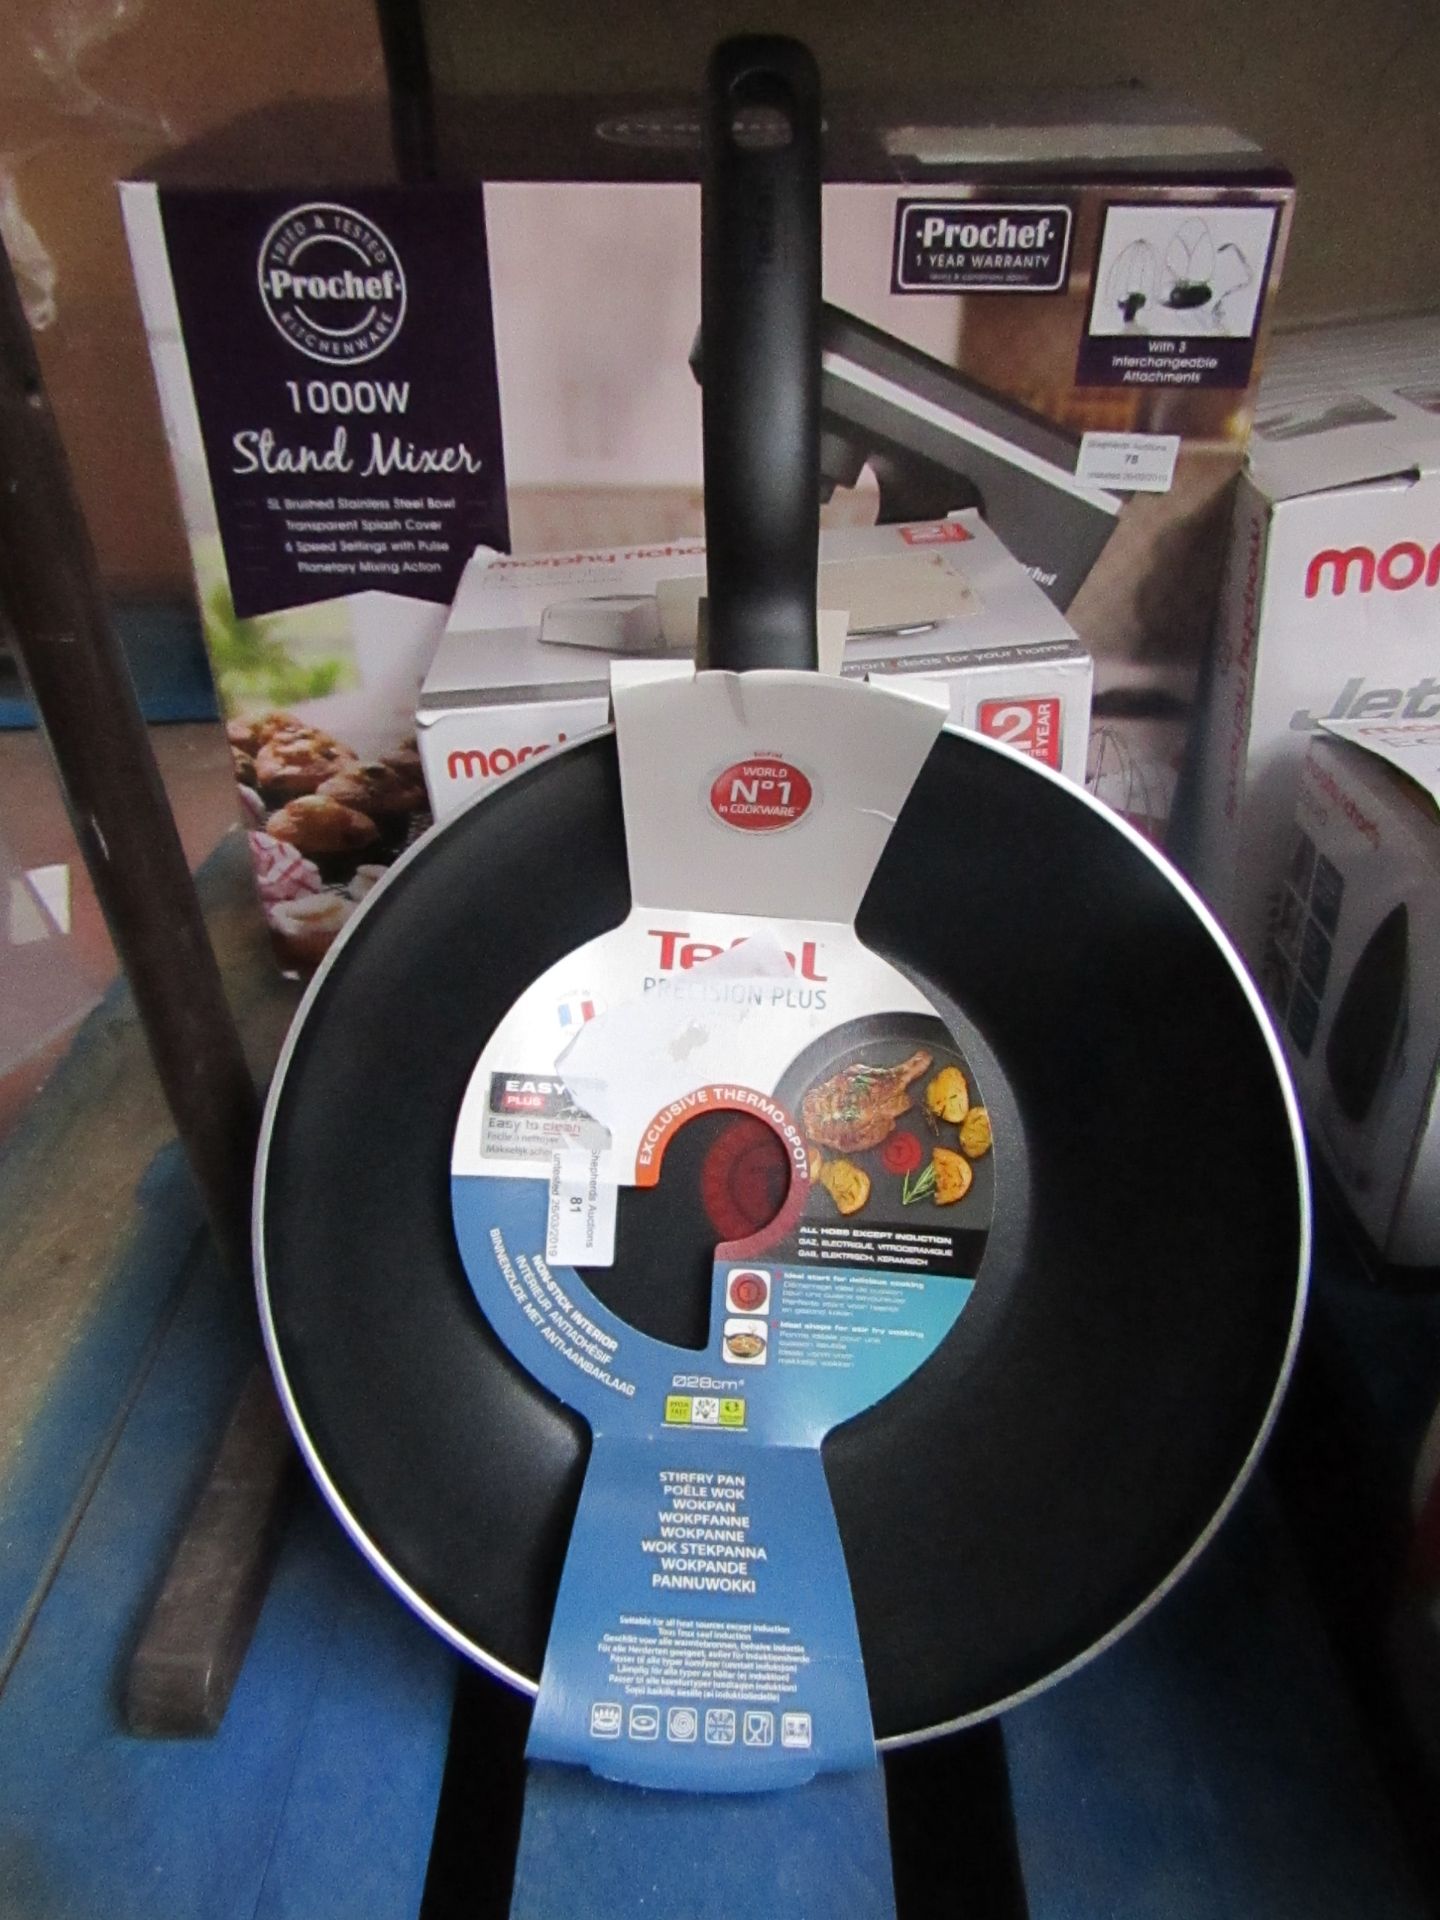 Tefal cooking pan unboxed  and unchecked